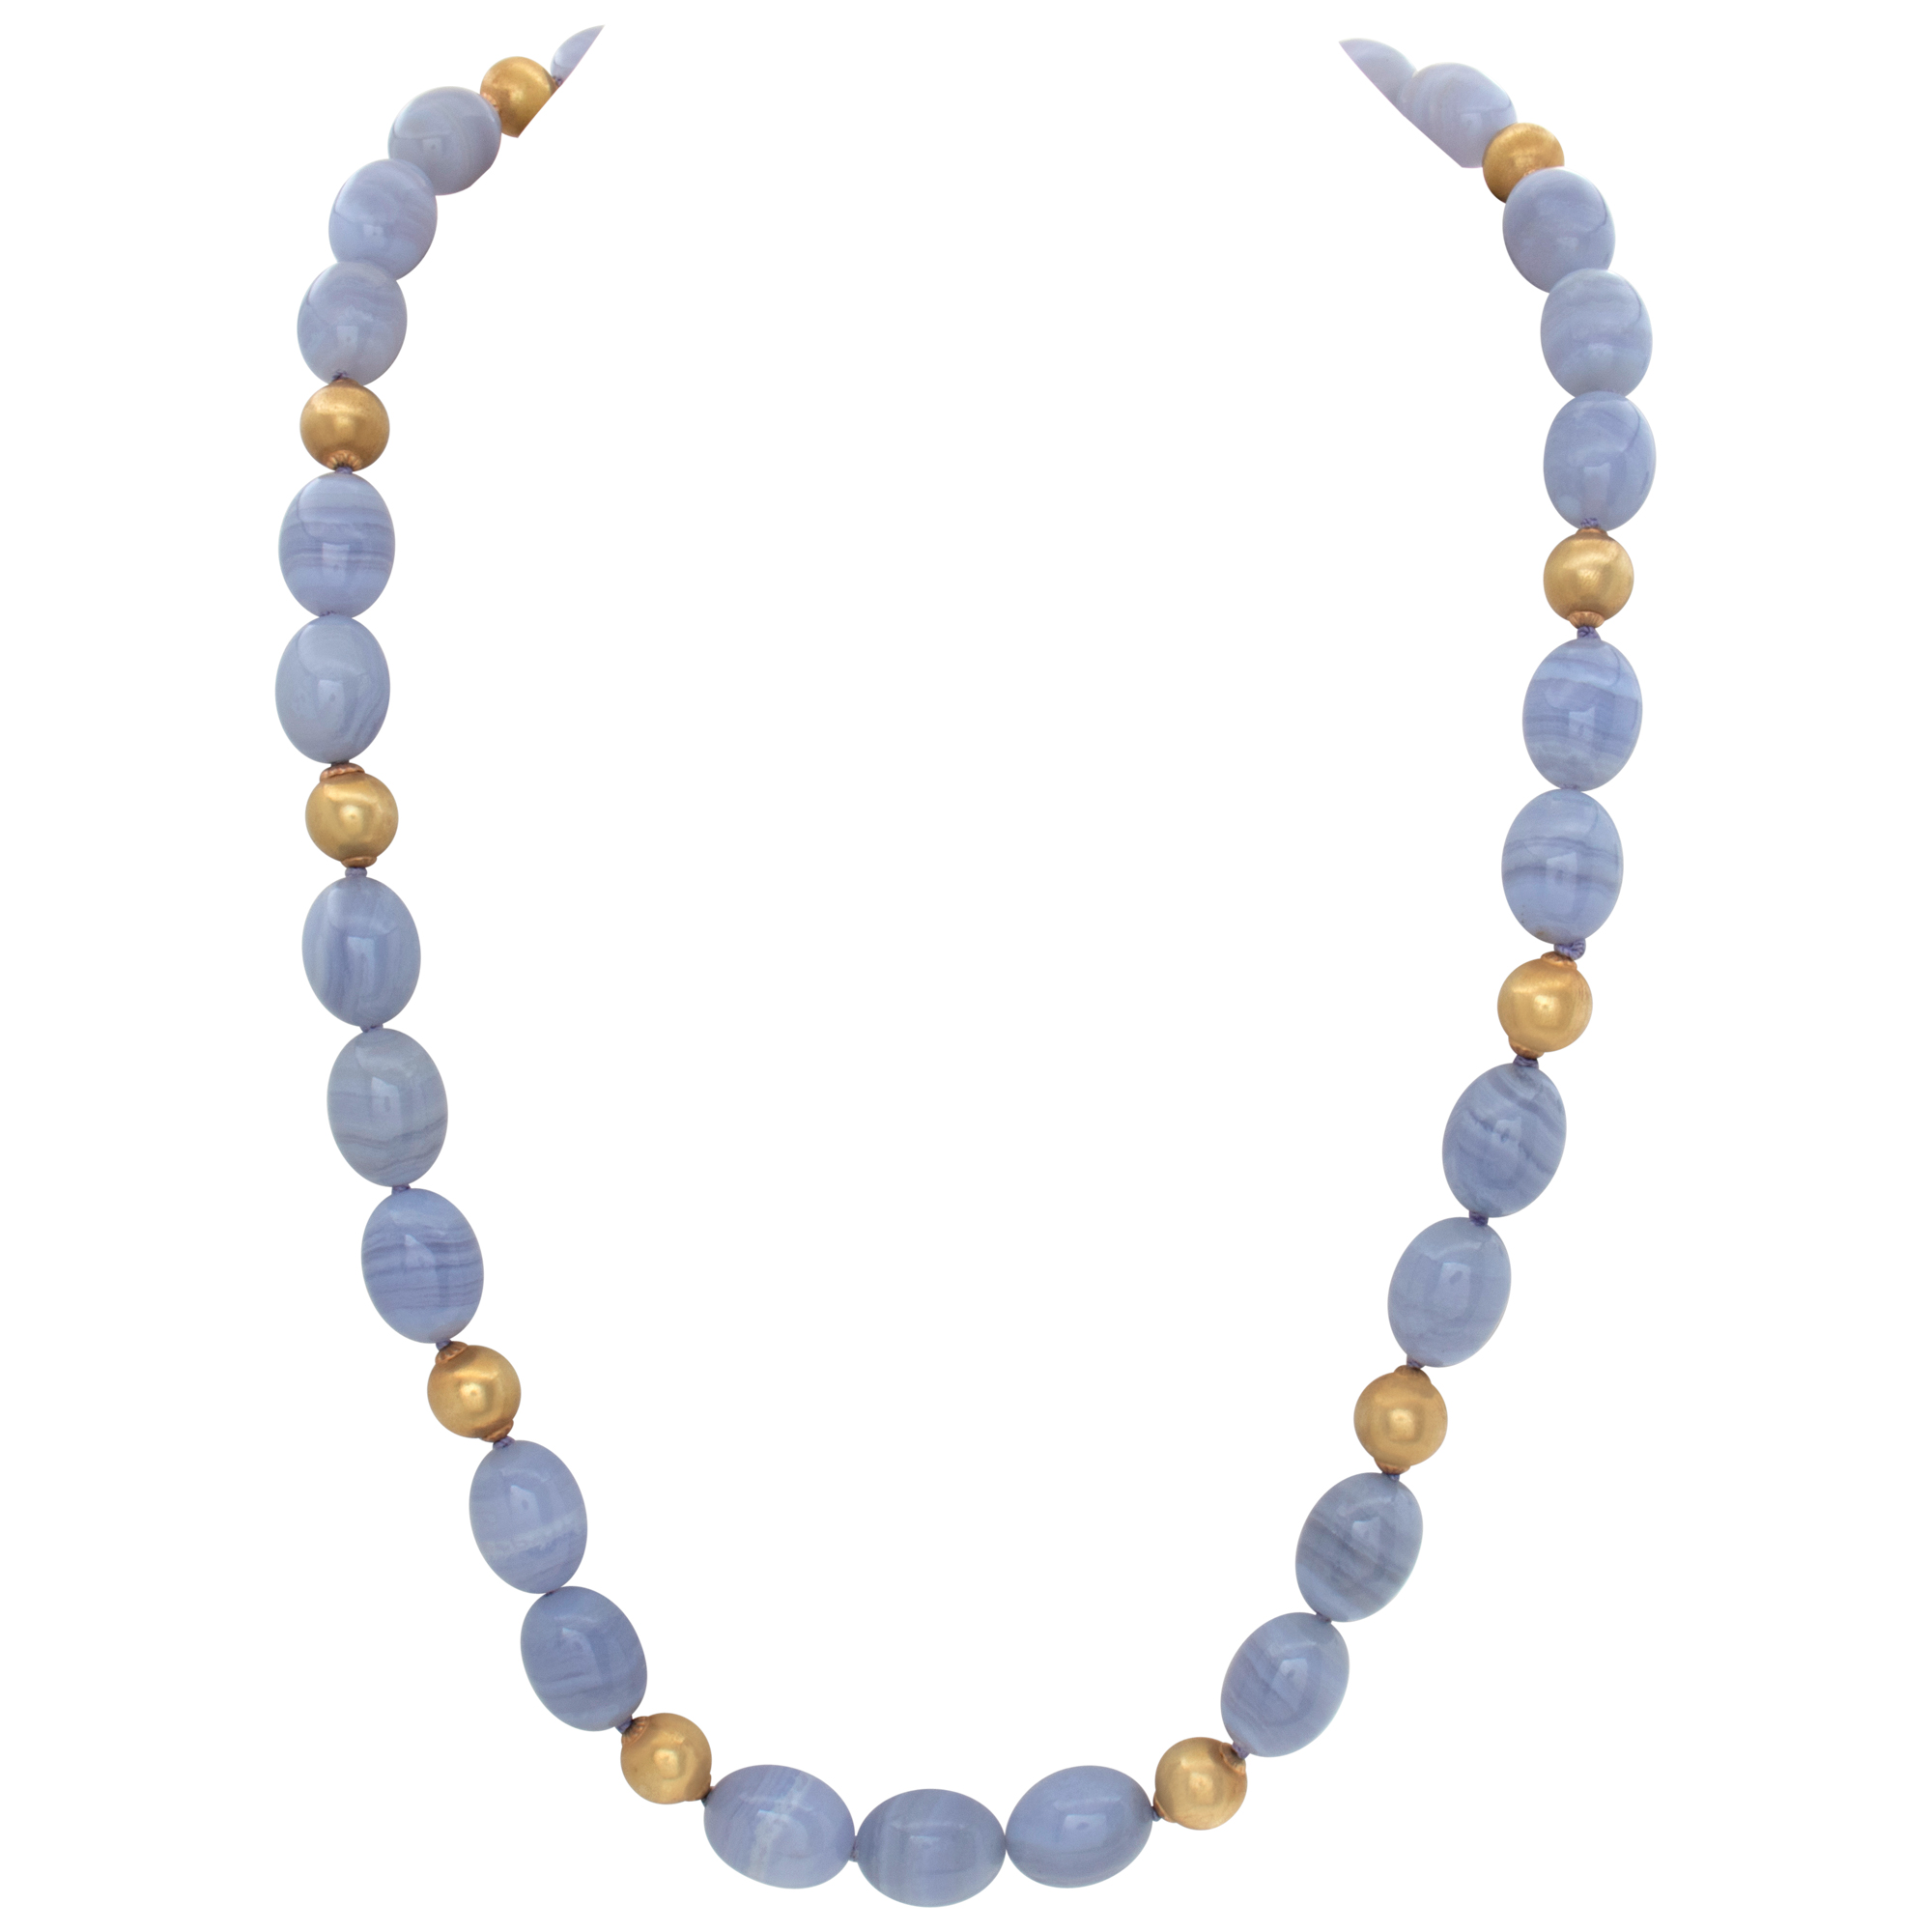 Blue lace chalcedony necklace with 18k gold beads image 1